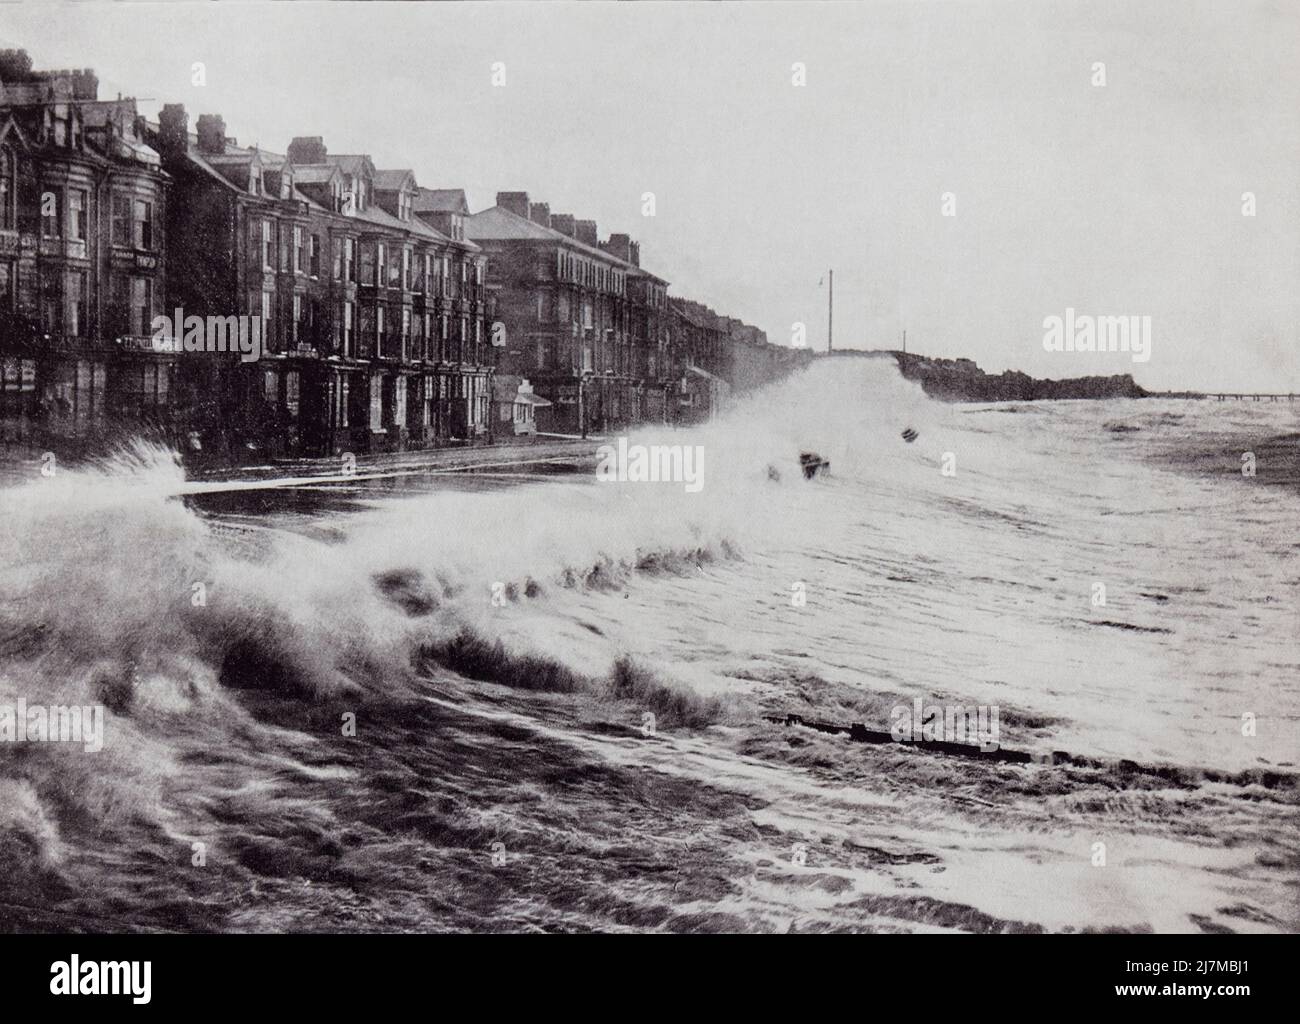 High seas.  Blackpool, Lancashire, England, seen here in the 19th century.  From Around The Coast,  An Album of Pictures from Photographs of the Chief Seaside Places of Interest in Great Britain and Ireland published London, 1895, by George Newnes Limited. Stock Photo